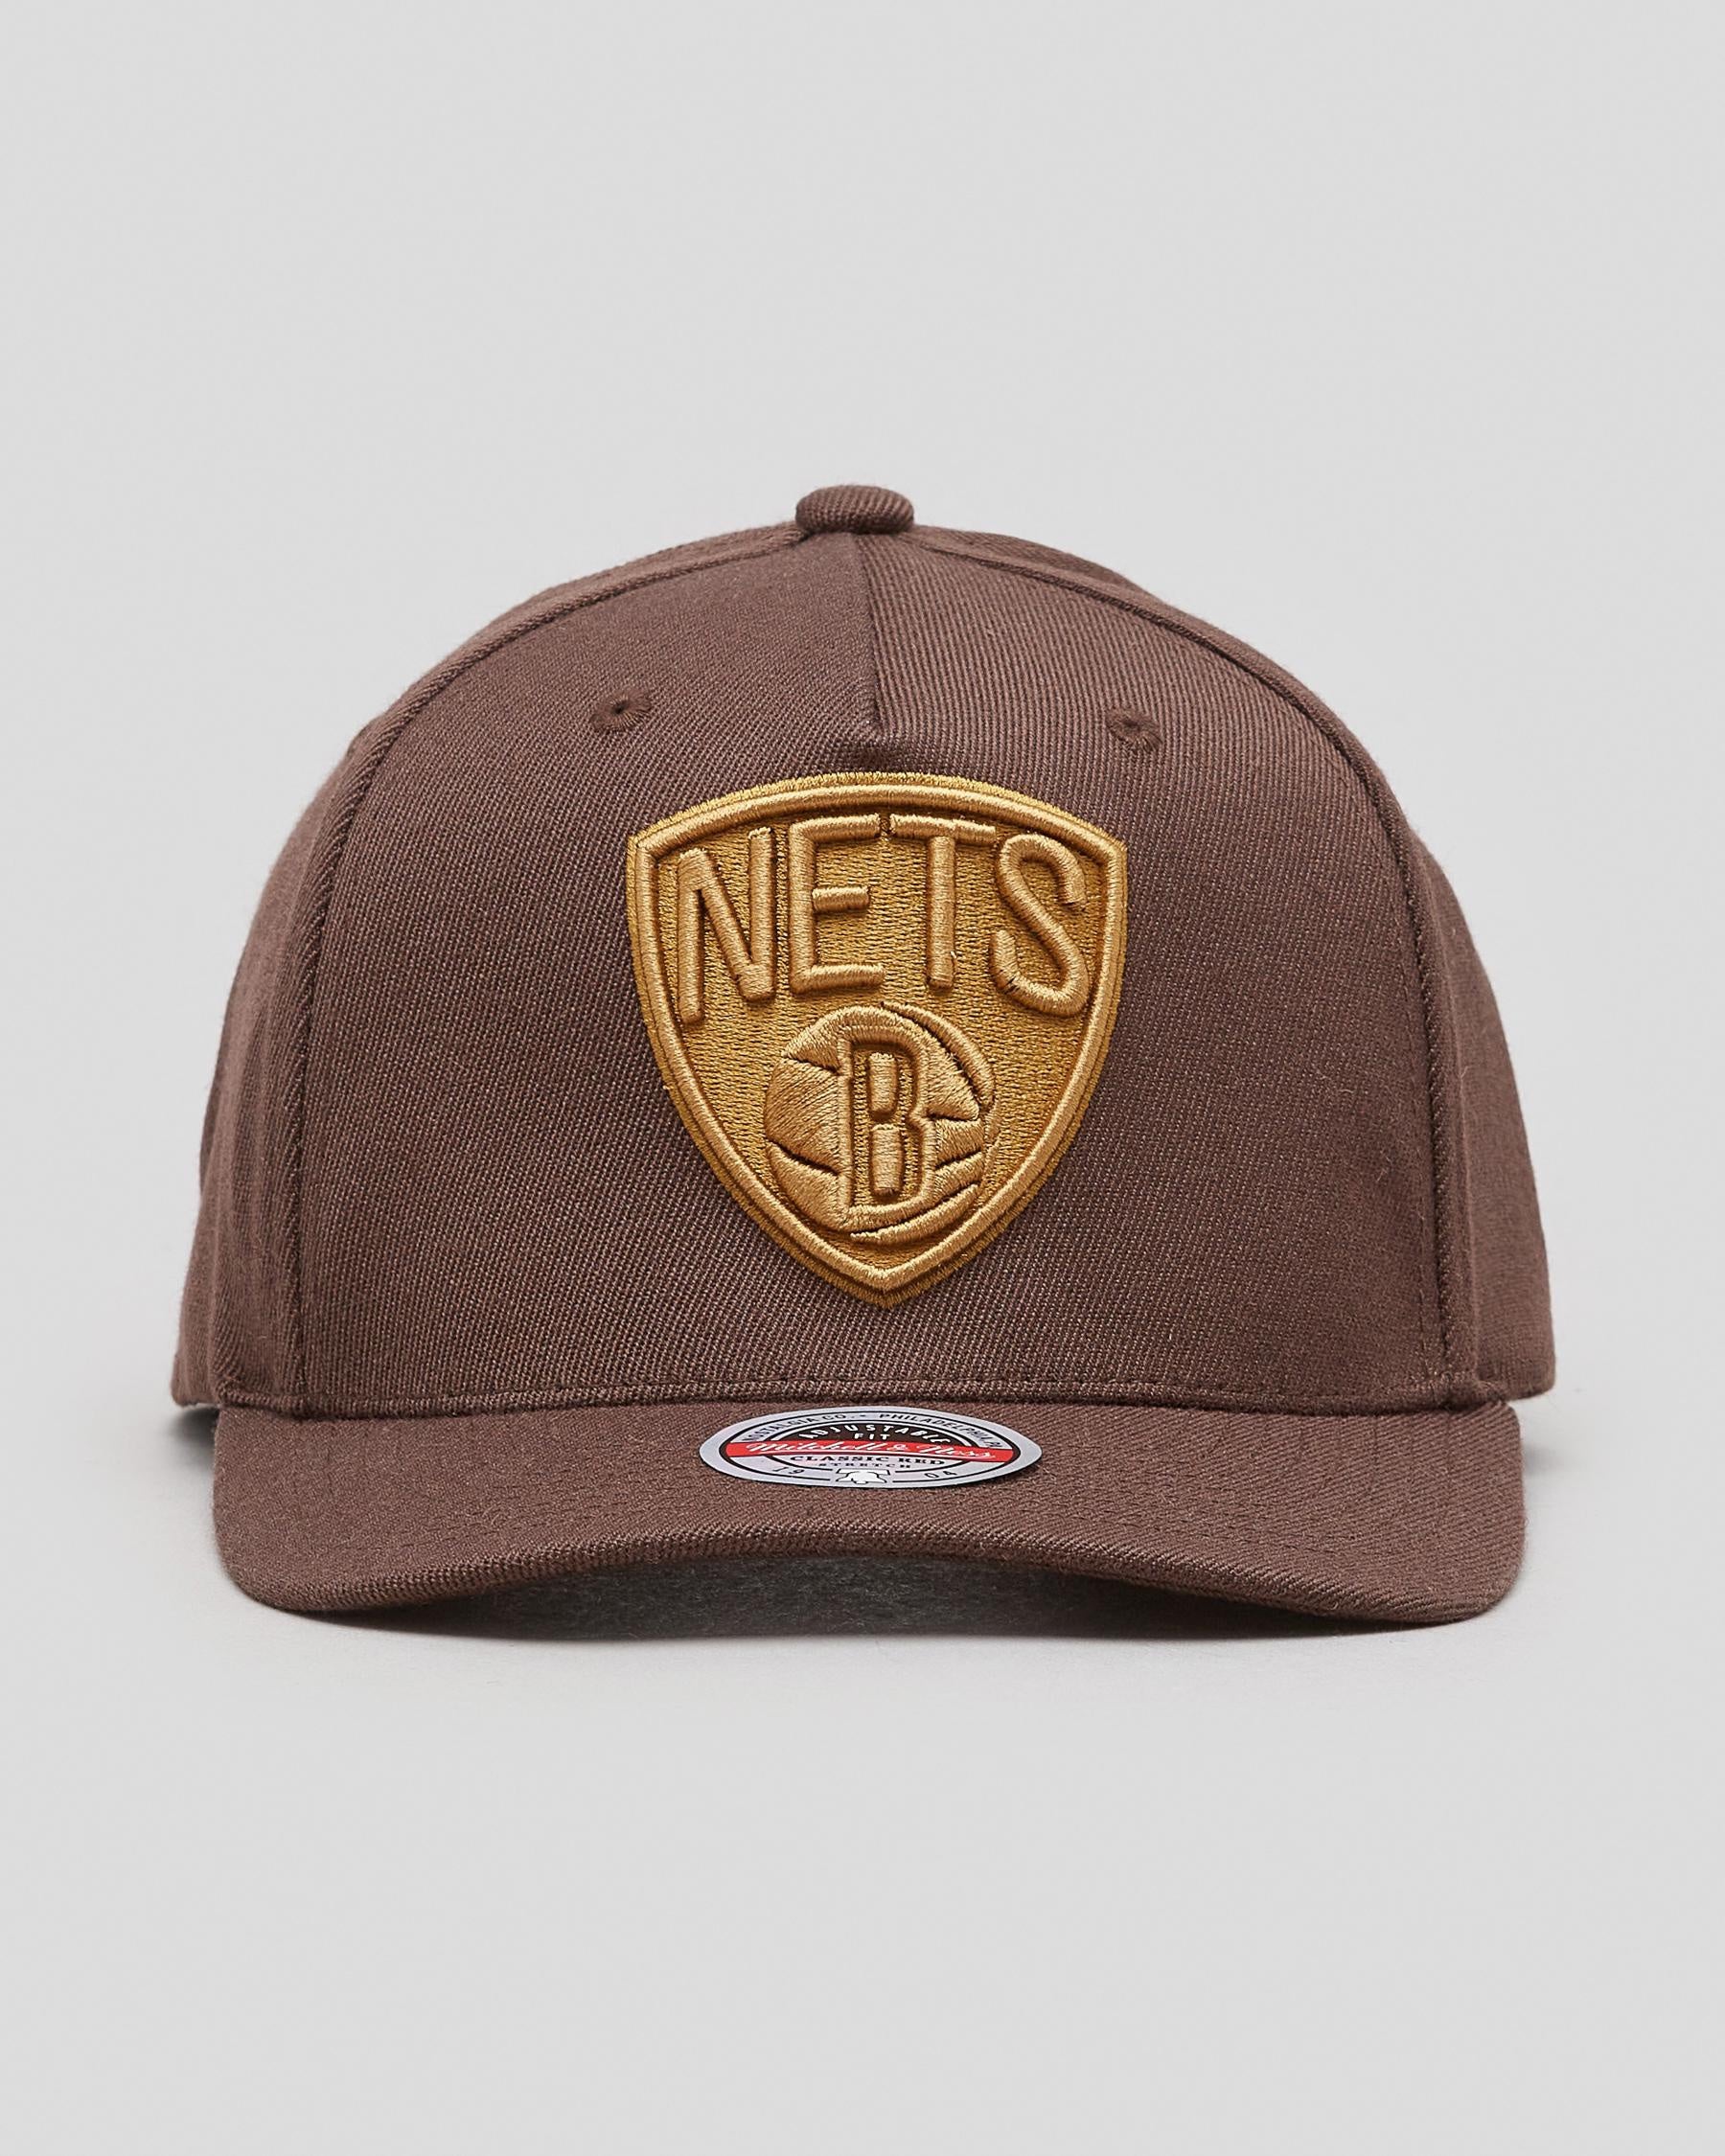 MNA-Z19 (Lux brown cl nets baroque brown hat osfm) 32292391 MITCHELL AND NESS